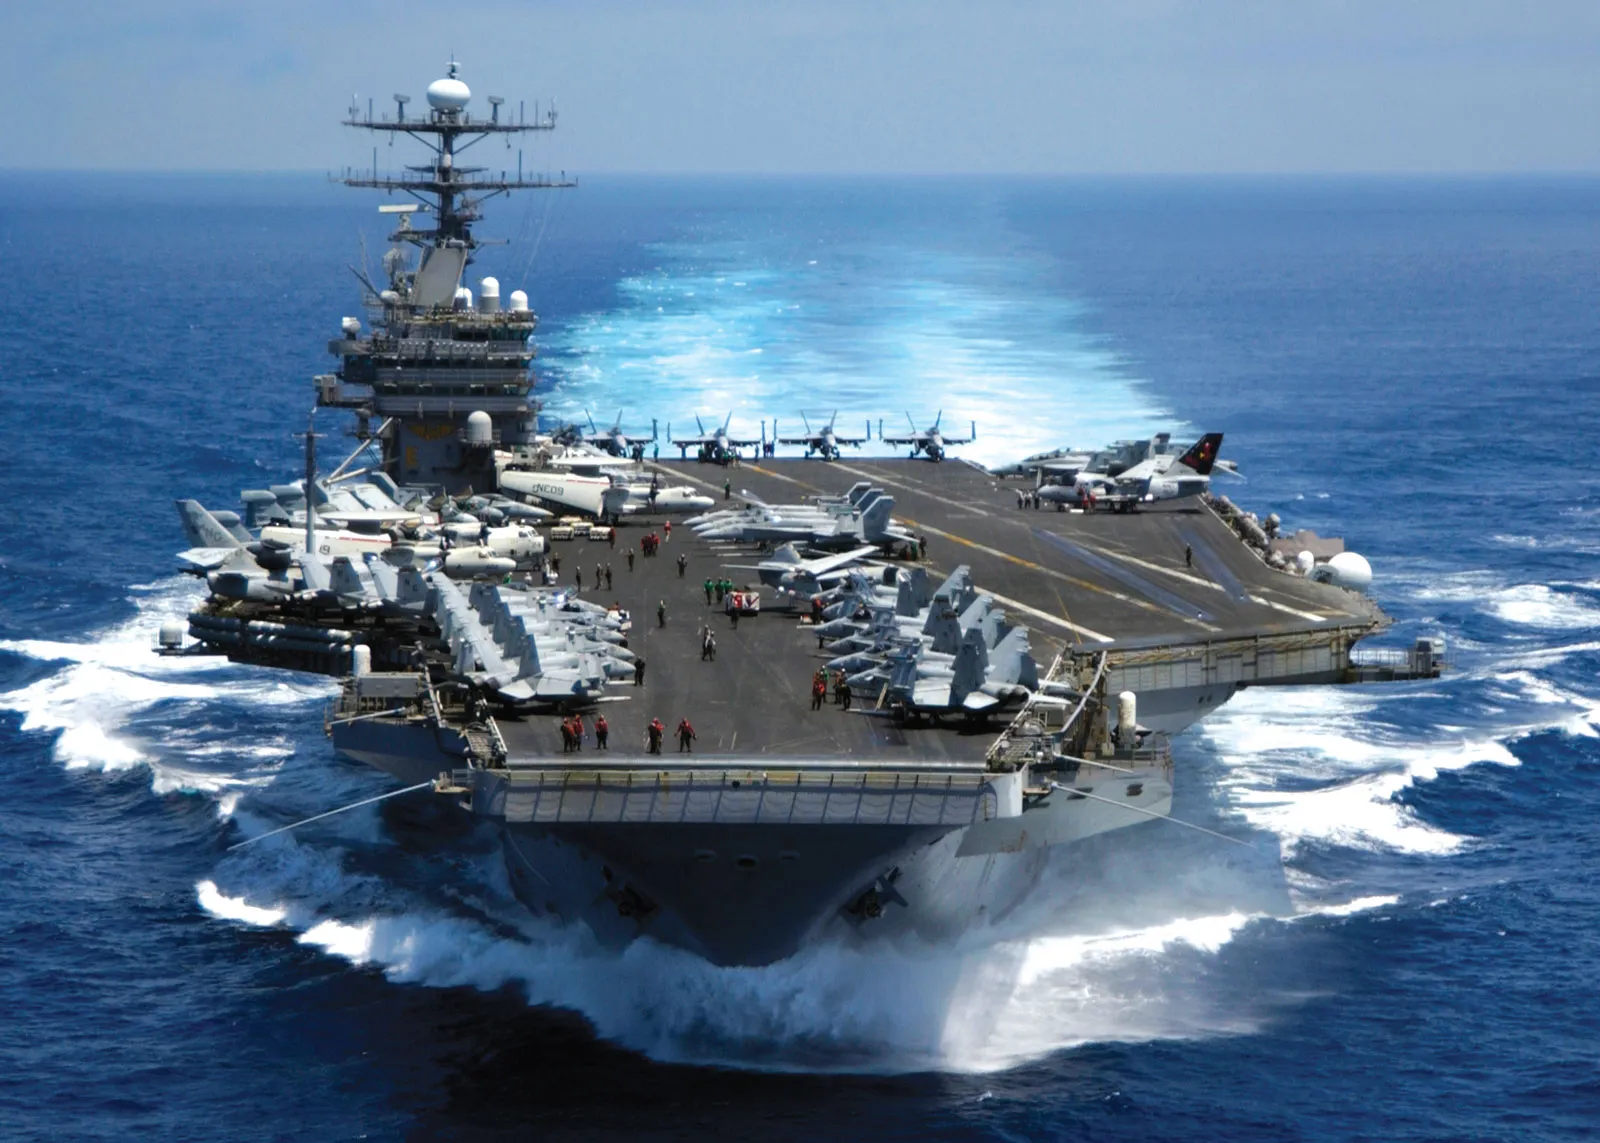 What Minimum Distance Must be Maintained from a U.S. Naval Vessel? Safety Guidelines Explained